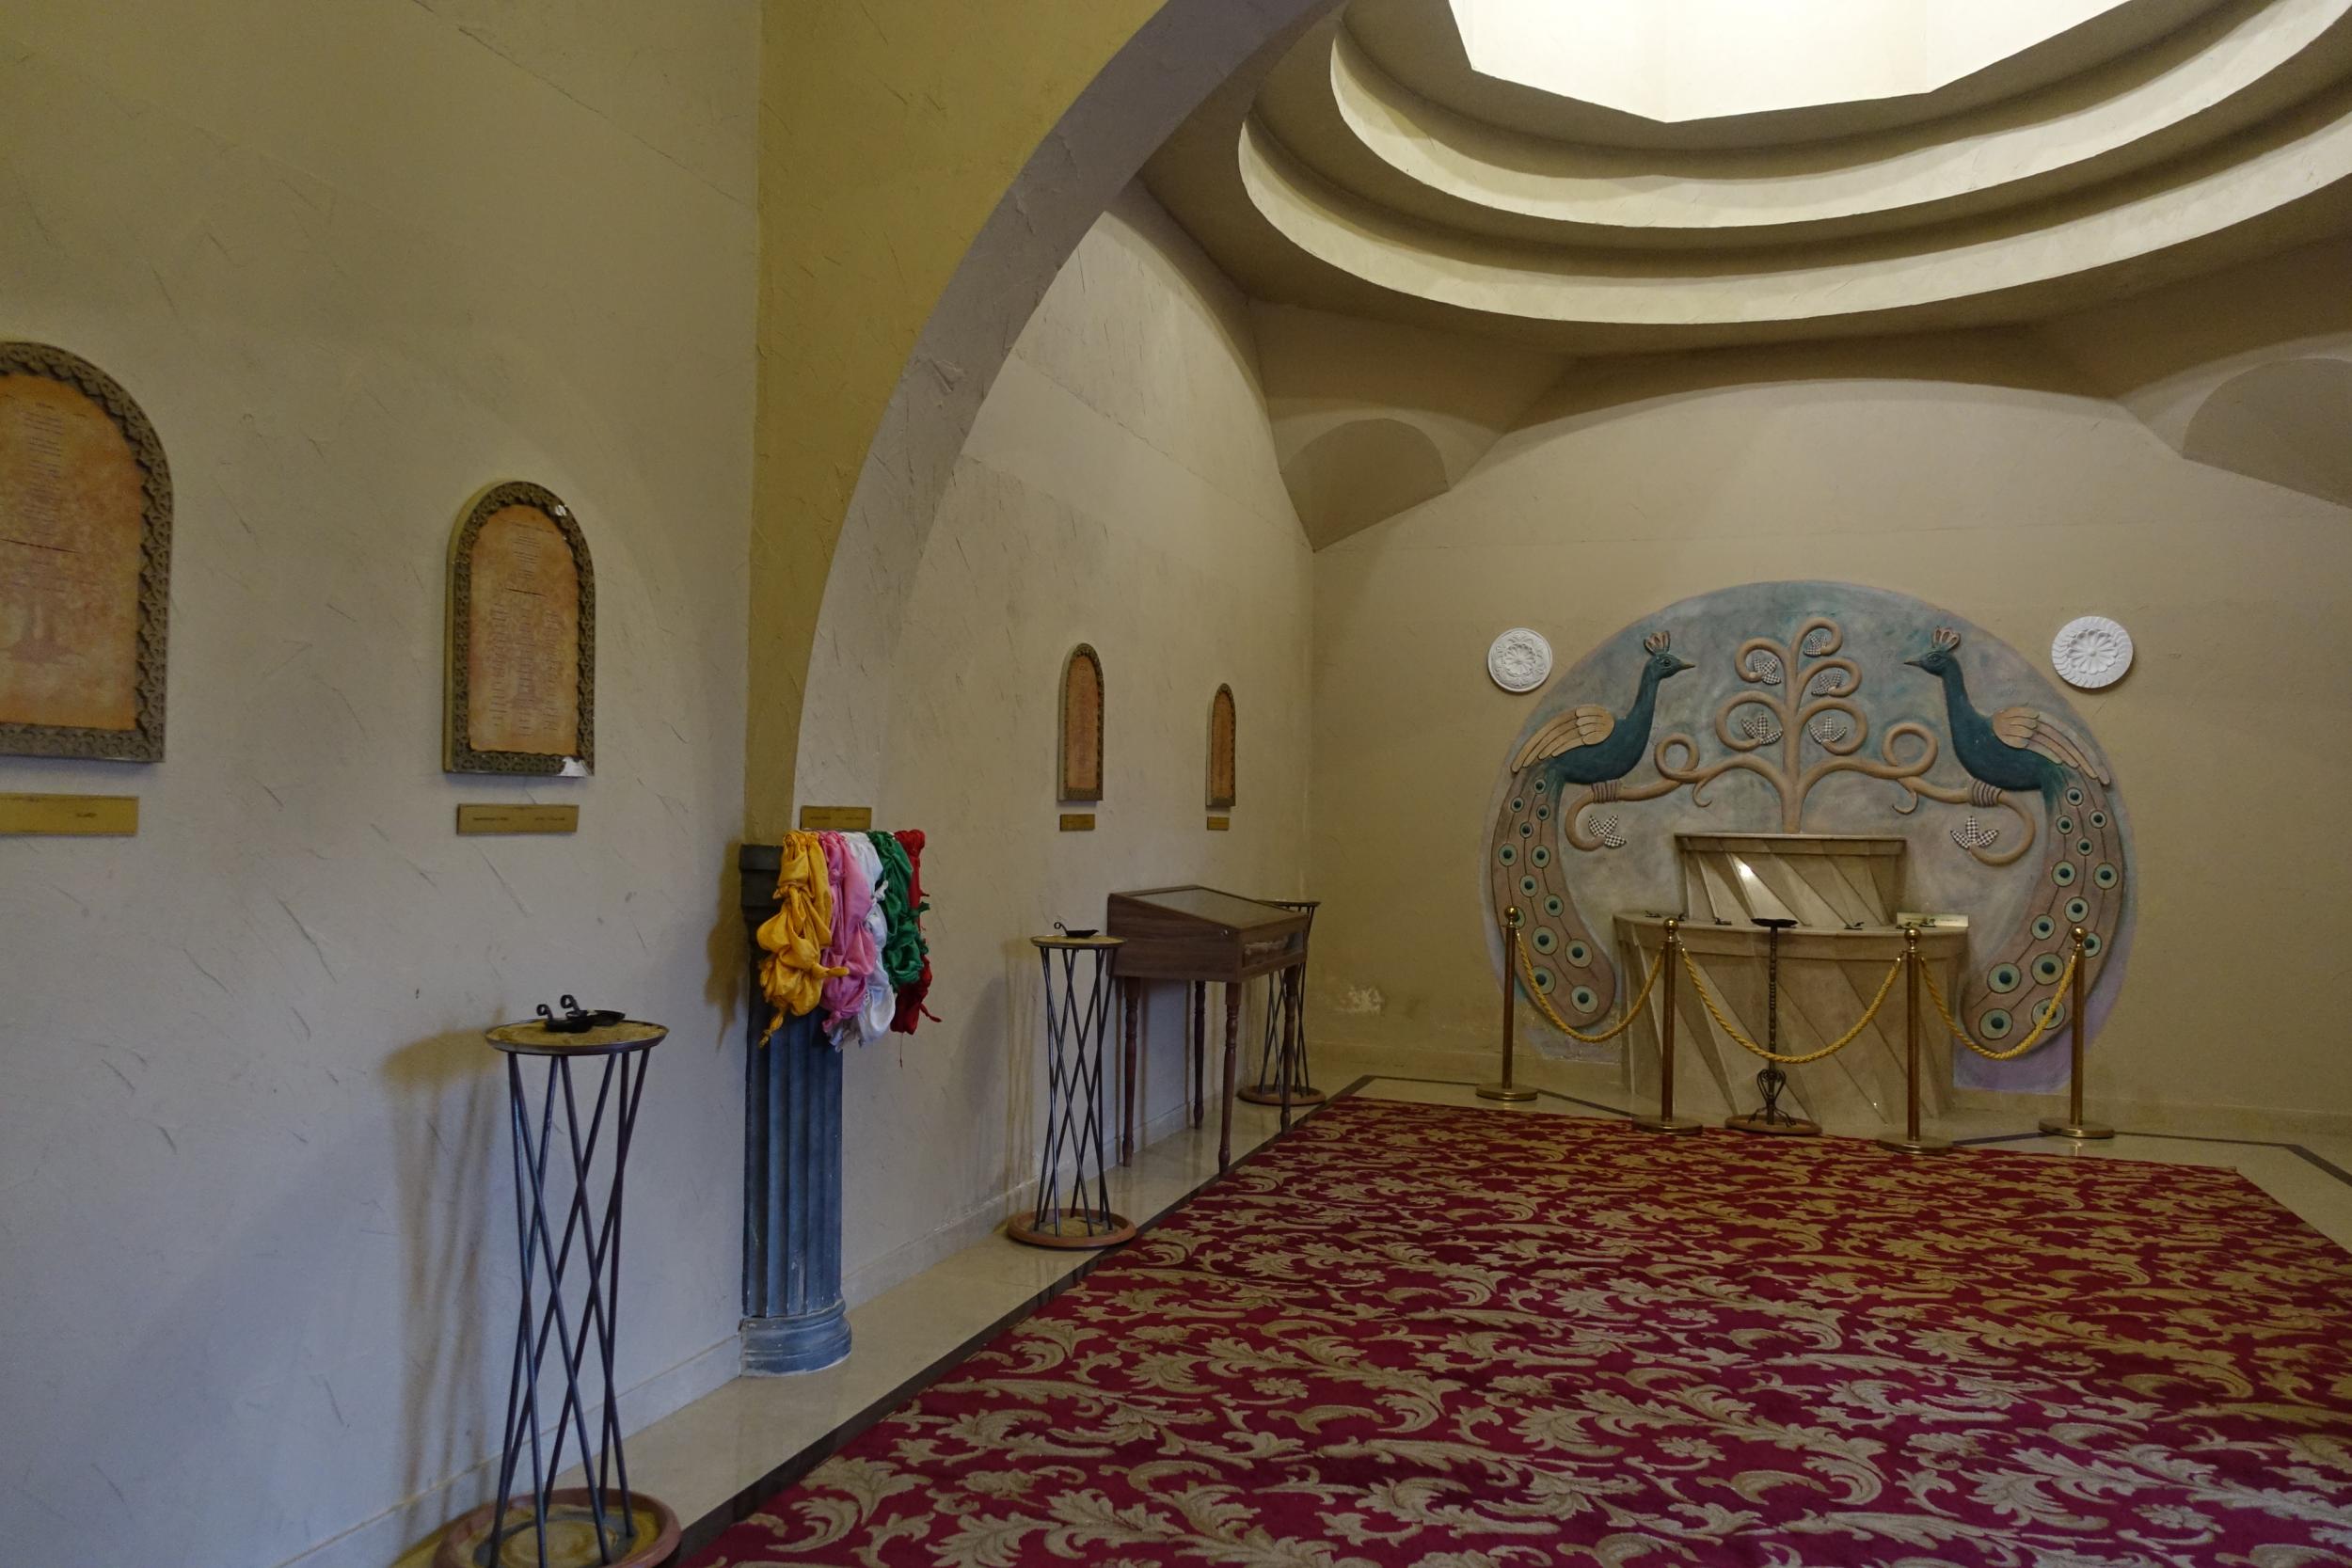 At the time of its launch in 2015, the Quba Sultan Ezid was the second Yazidi temple in the world outside of Iraq